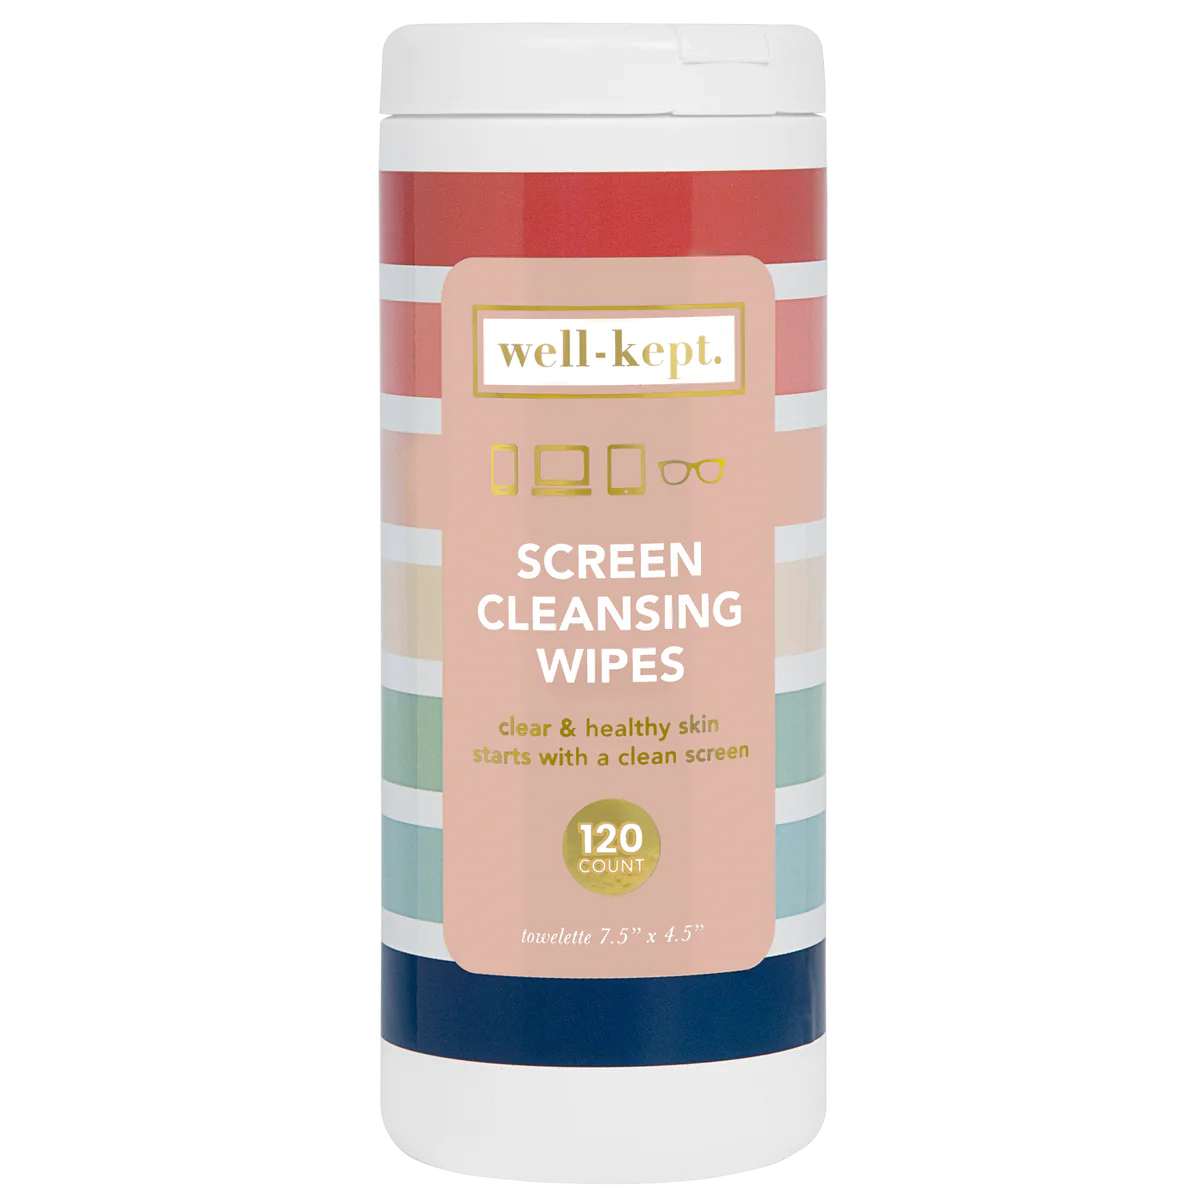 Canister well-kept screen cleansing wipes